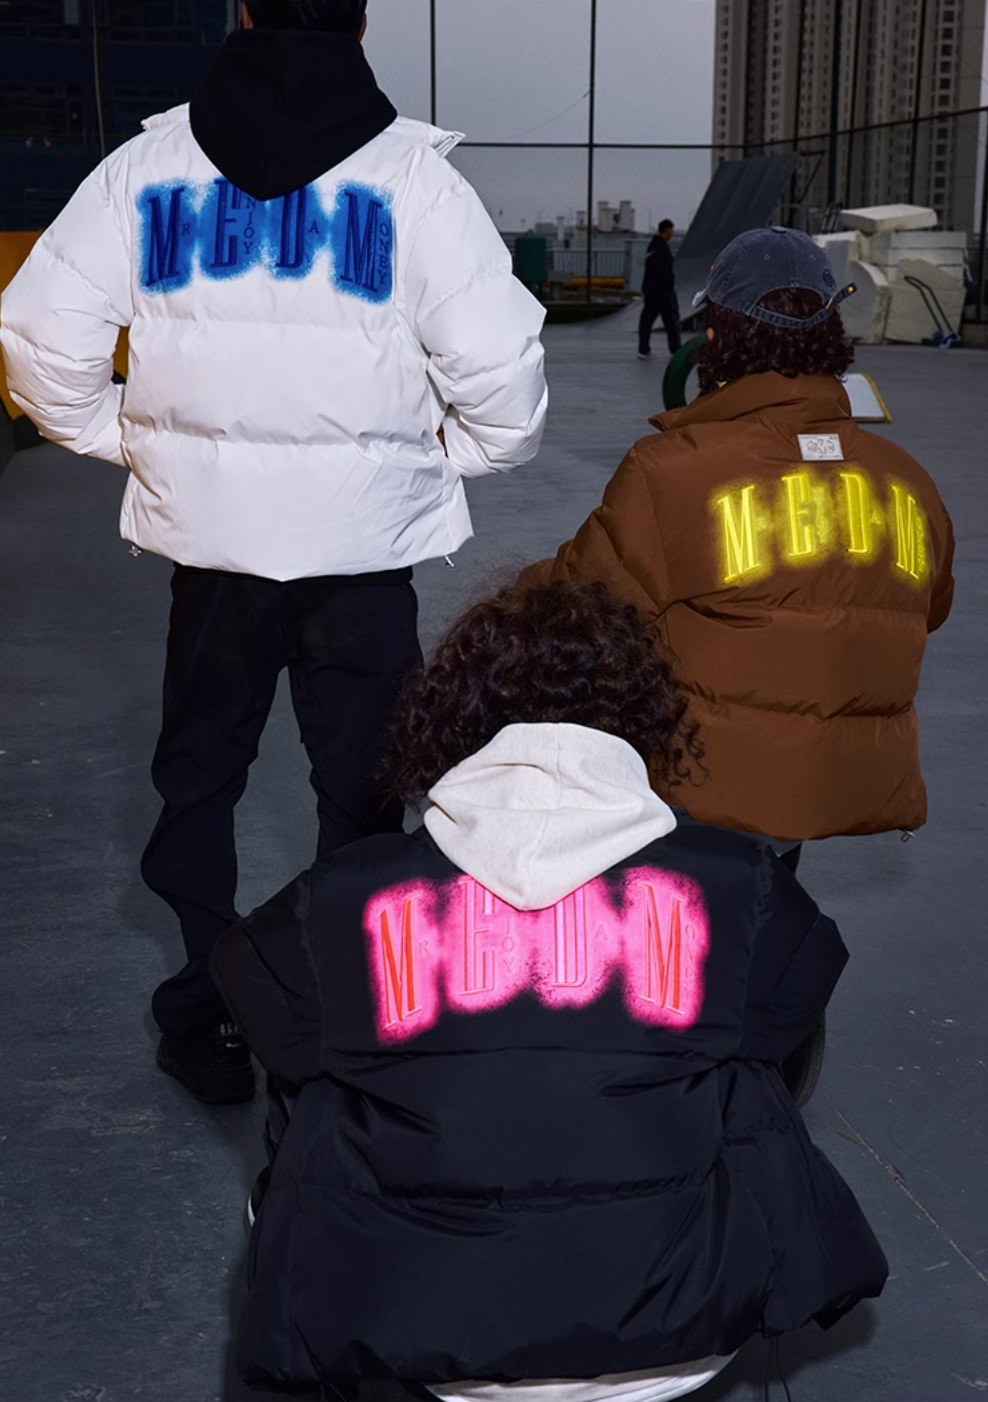 MEDM Neon Embroidery Short Down Jacket